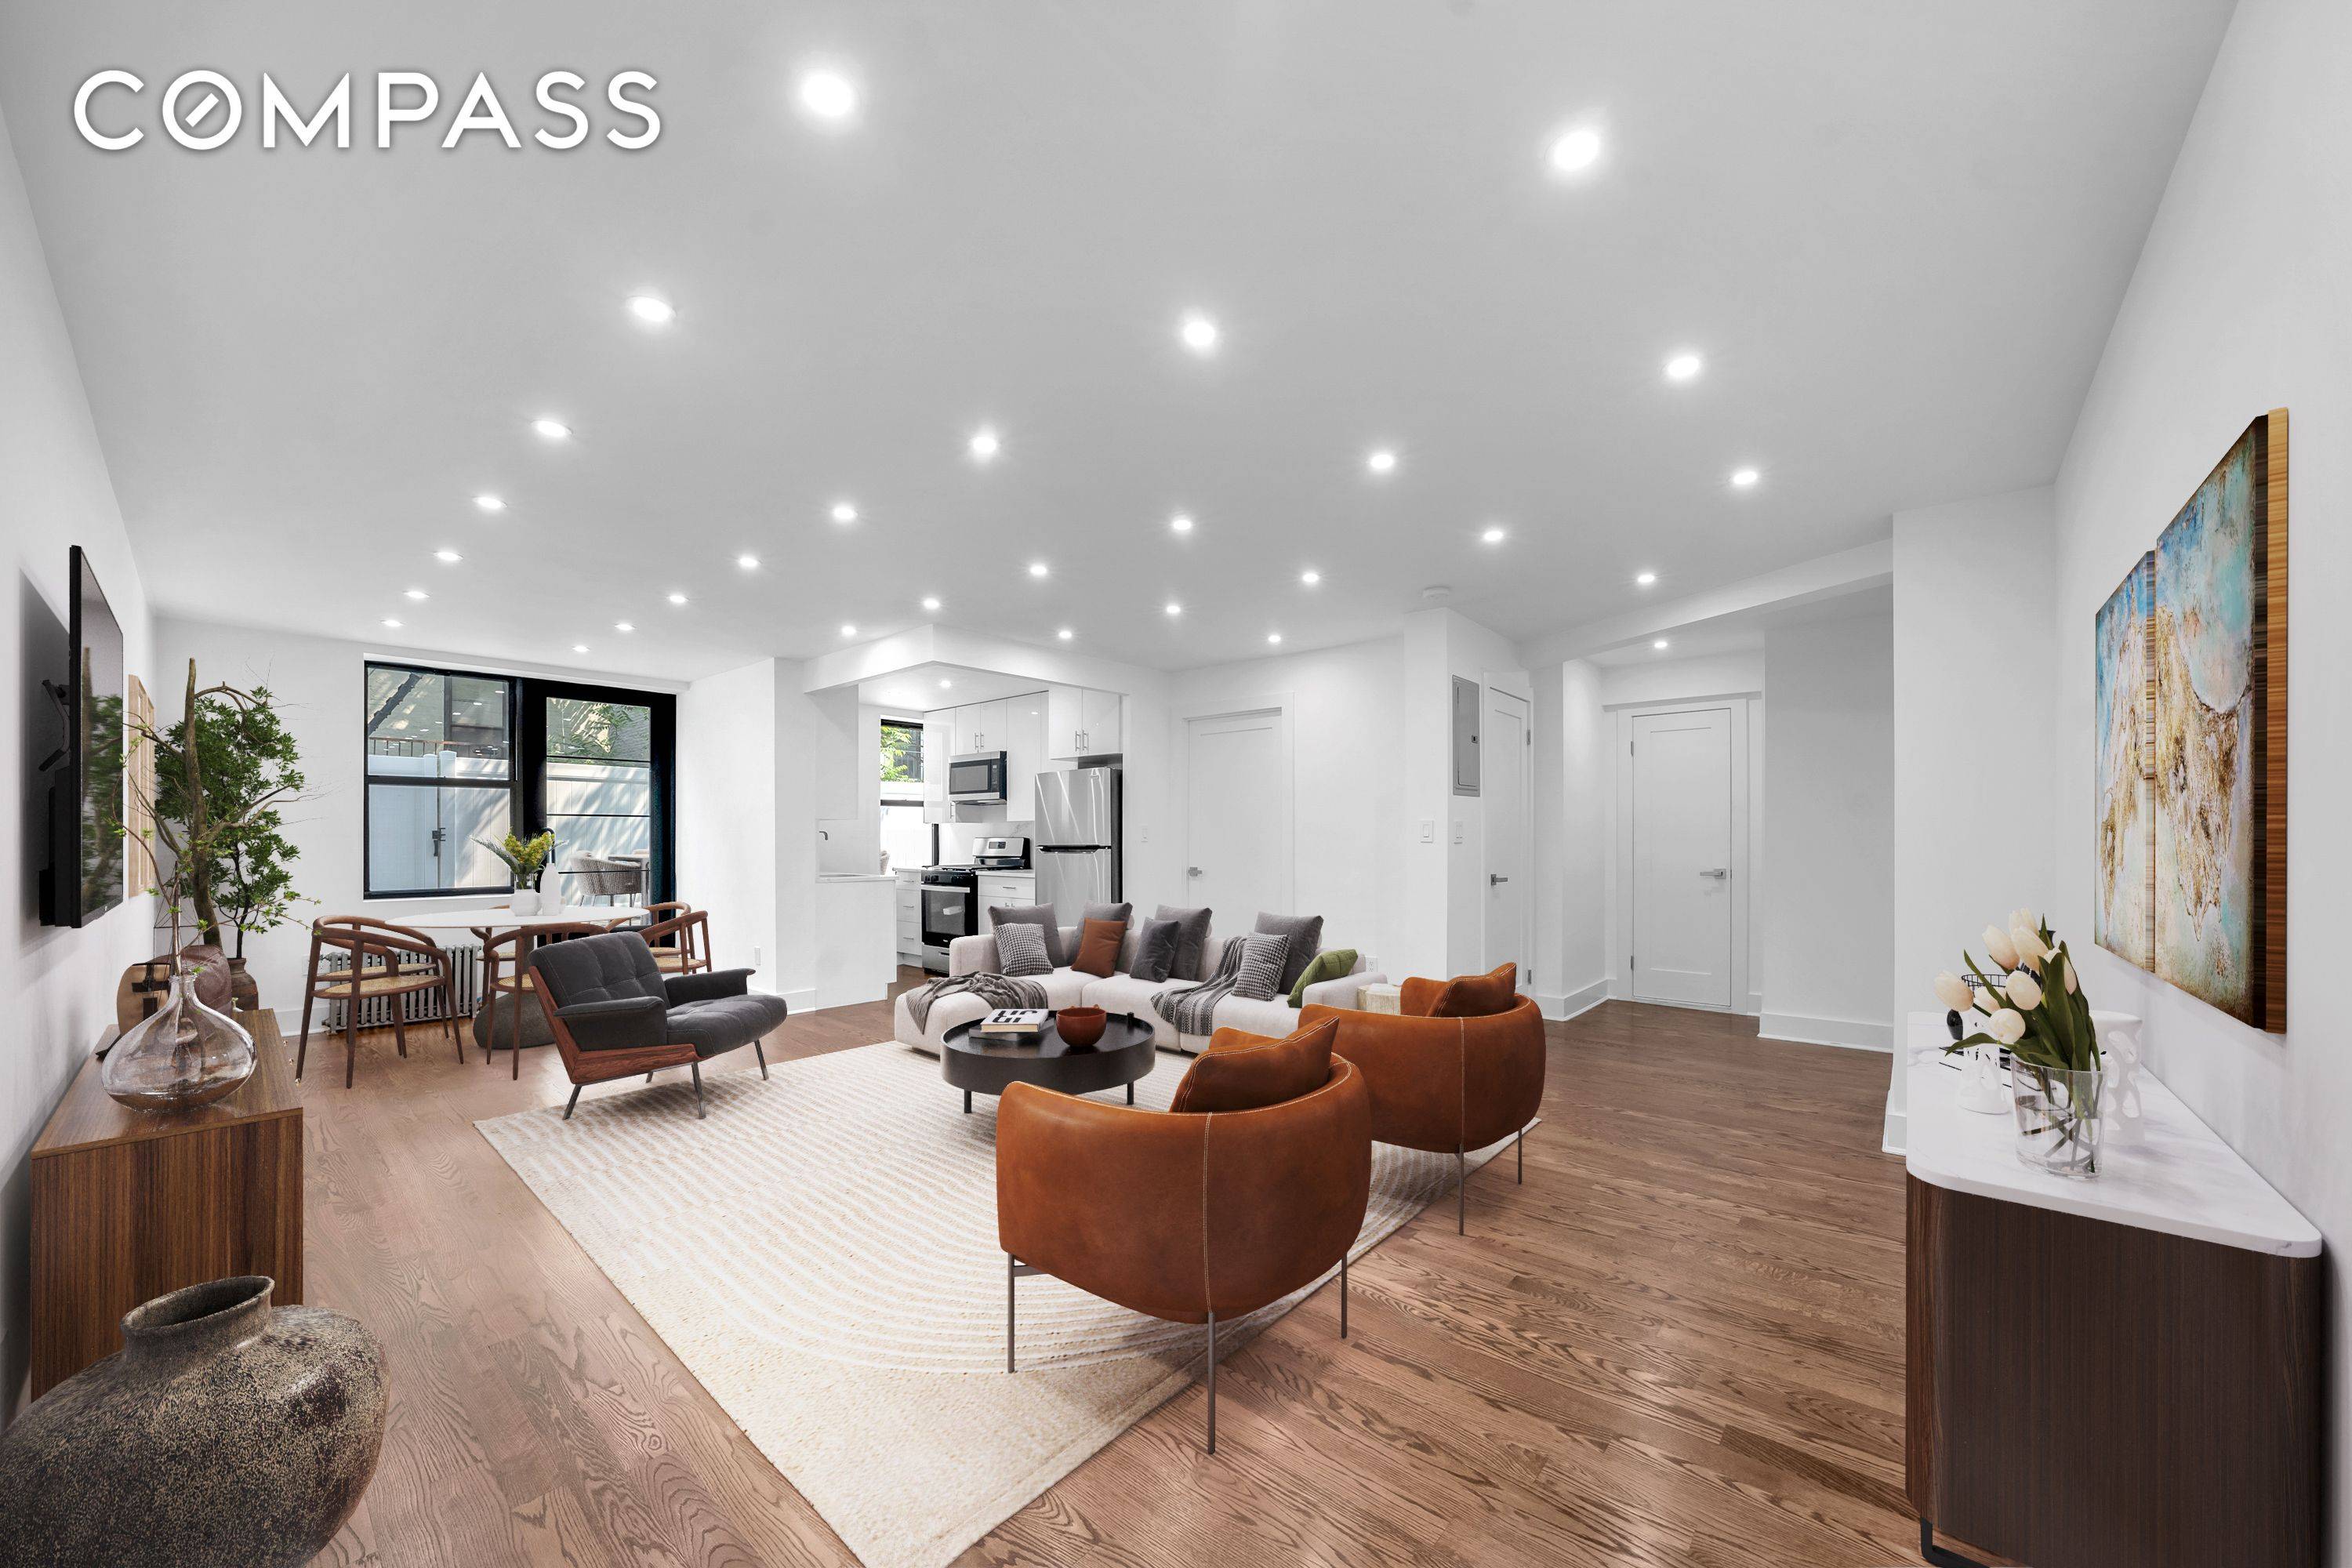 Come home to the rare opportunity of this large, newly fully renovated two bedroom, two bath condo with exceptional expansive private outdoor wrap around terrace !